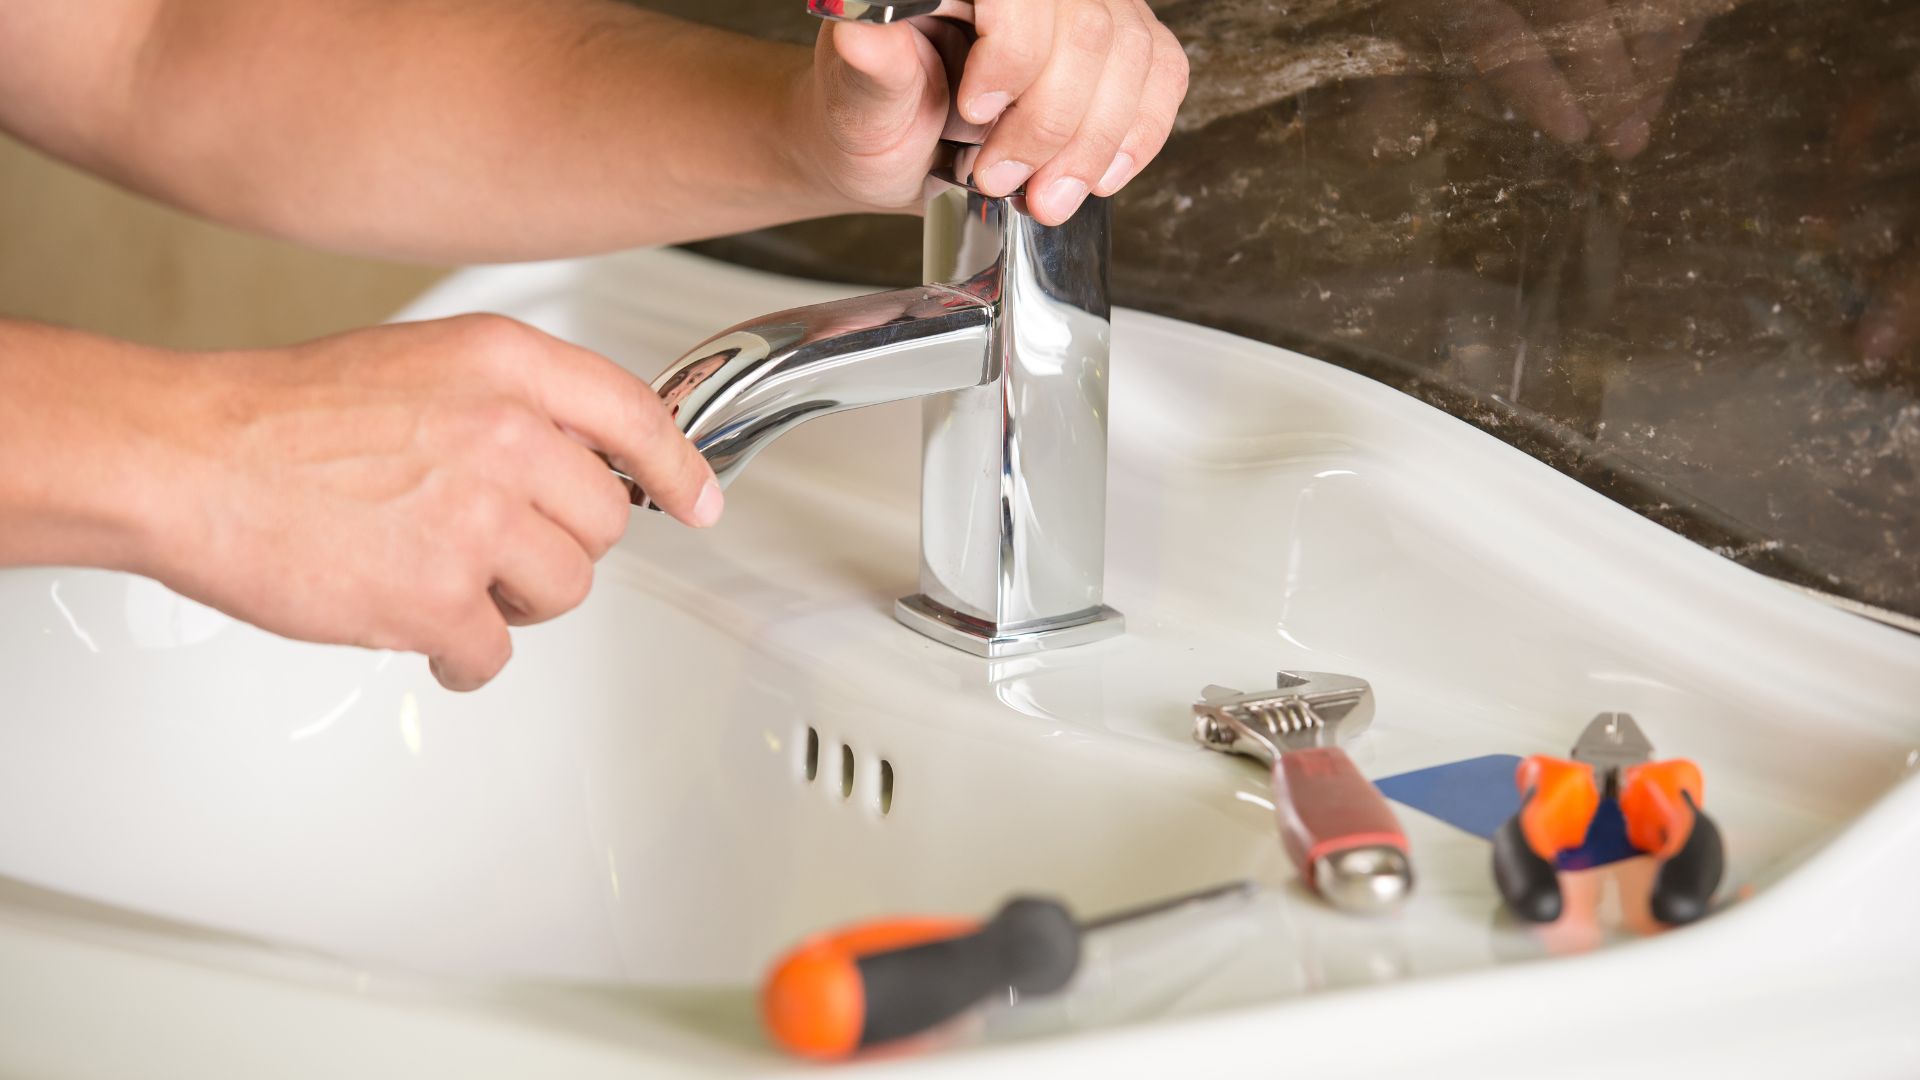 Plumbing services for bathrooms, including the expertise of plumbers, are essential for maintaining functionality and cleanliness in your restroom.